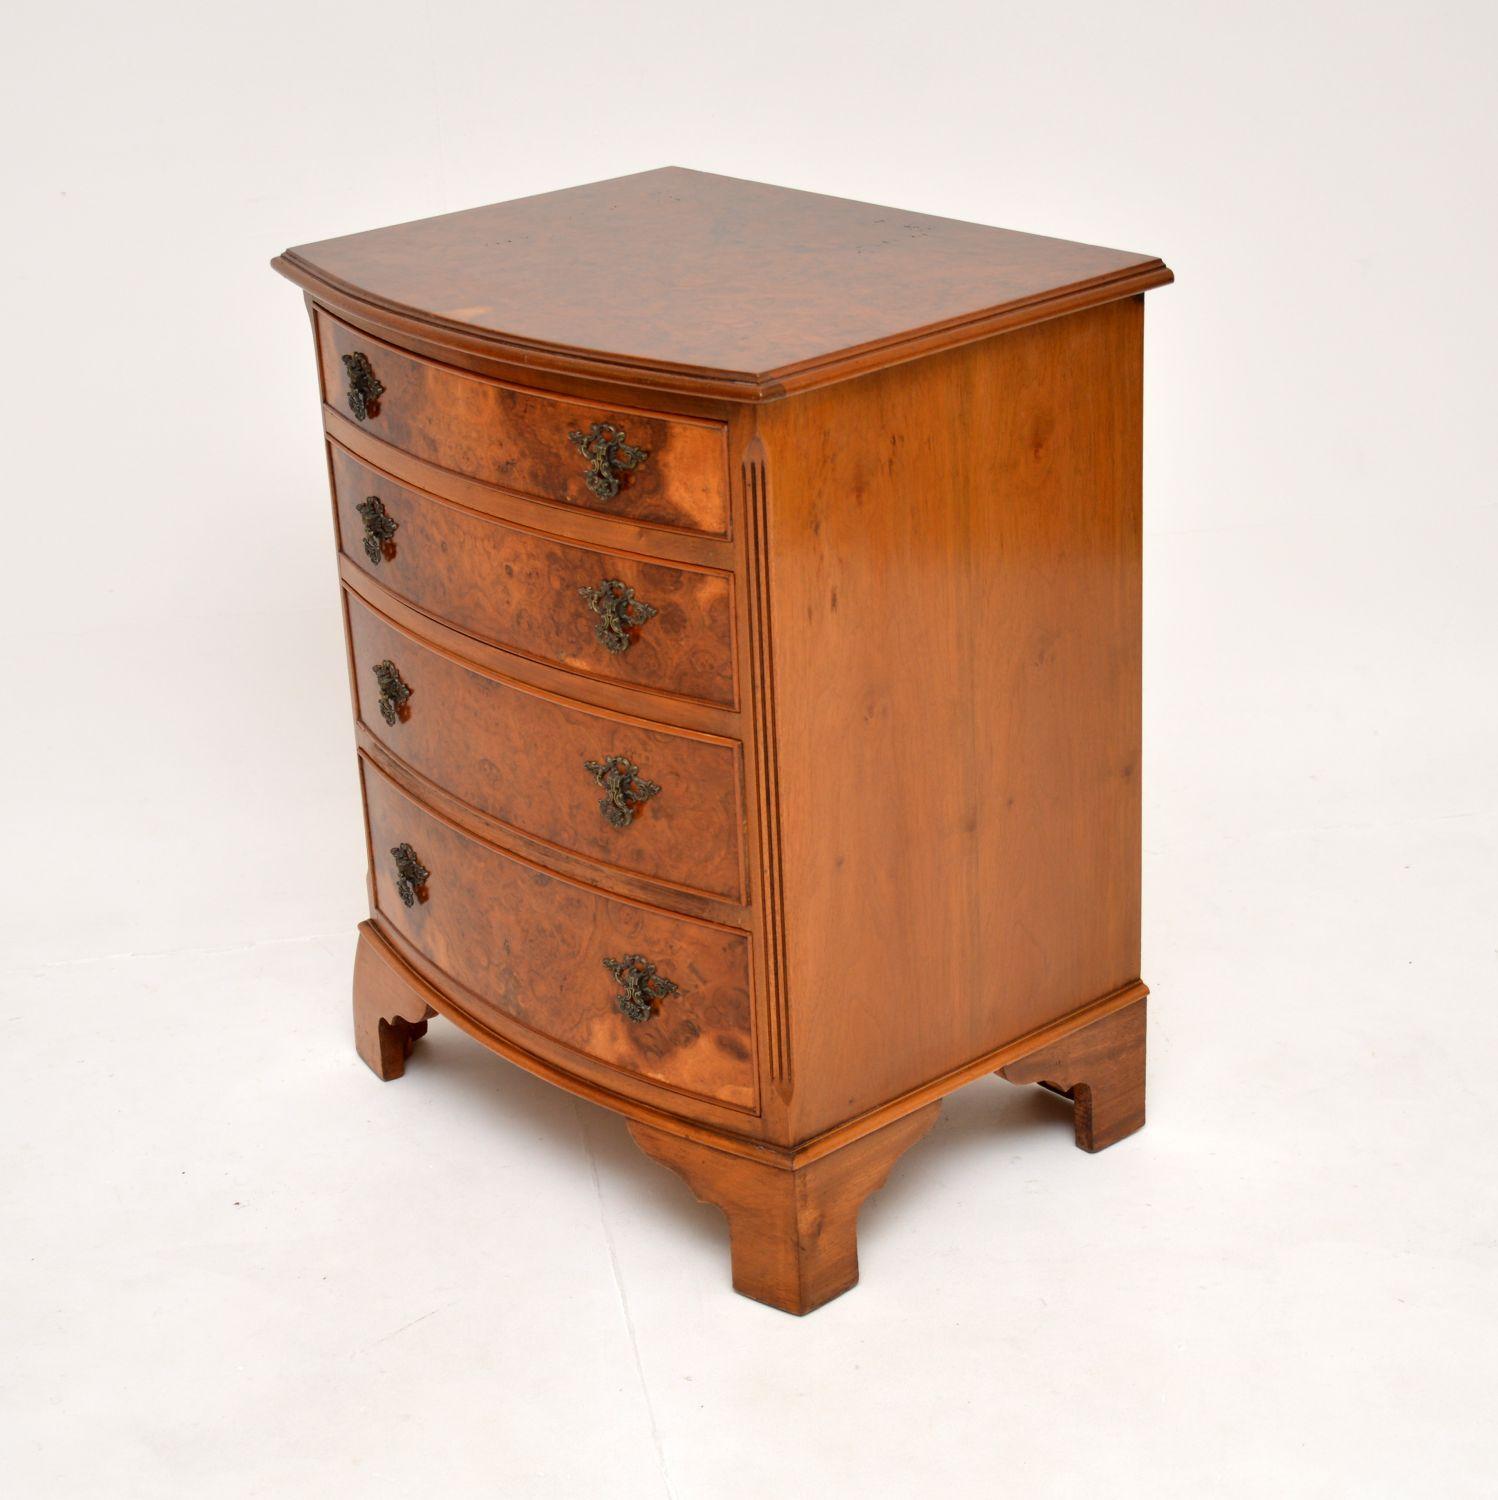 British Antique Bow Front Chest of Drawers in Burr Walnut